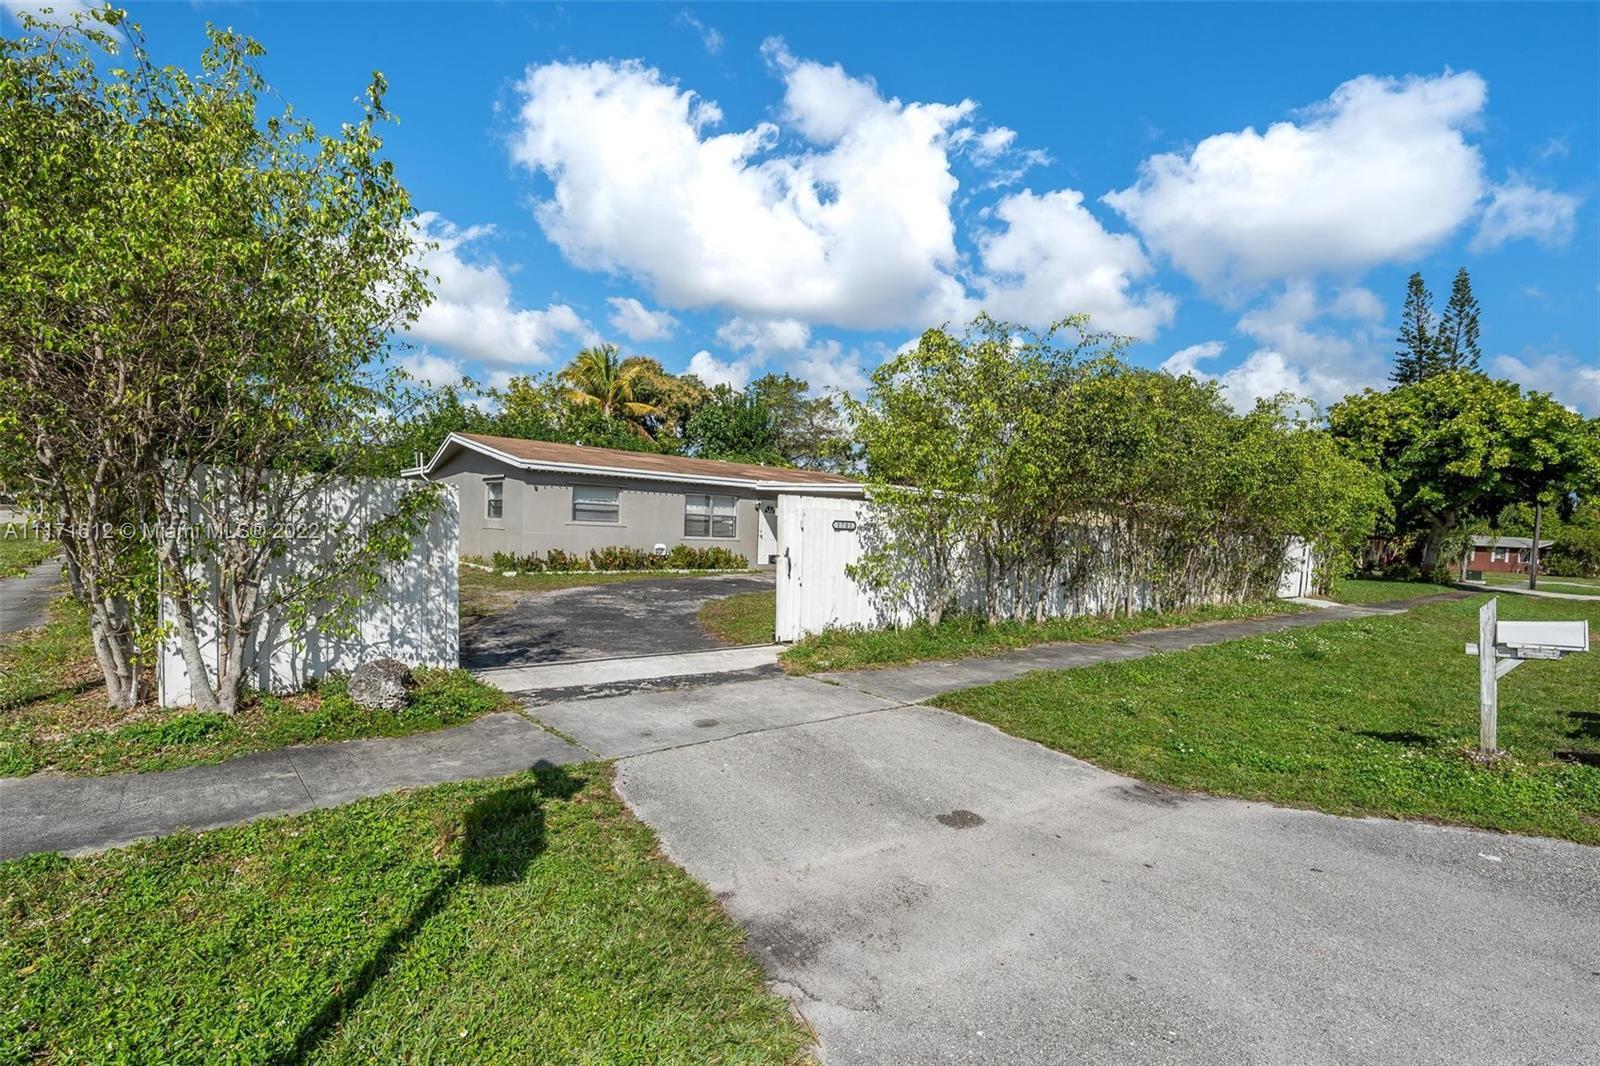 Great & Spacious home in large oversized completely fenced in corner lot. Ft. Lauderdale Location ne